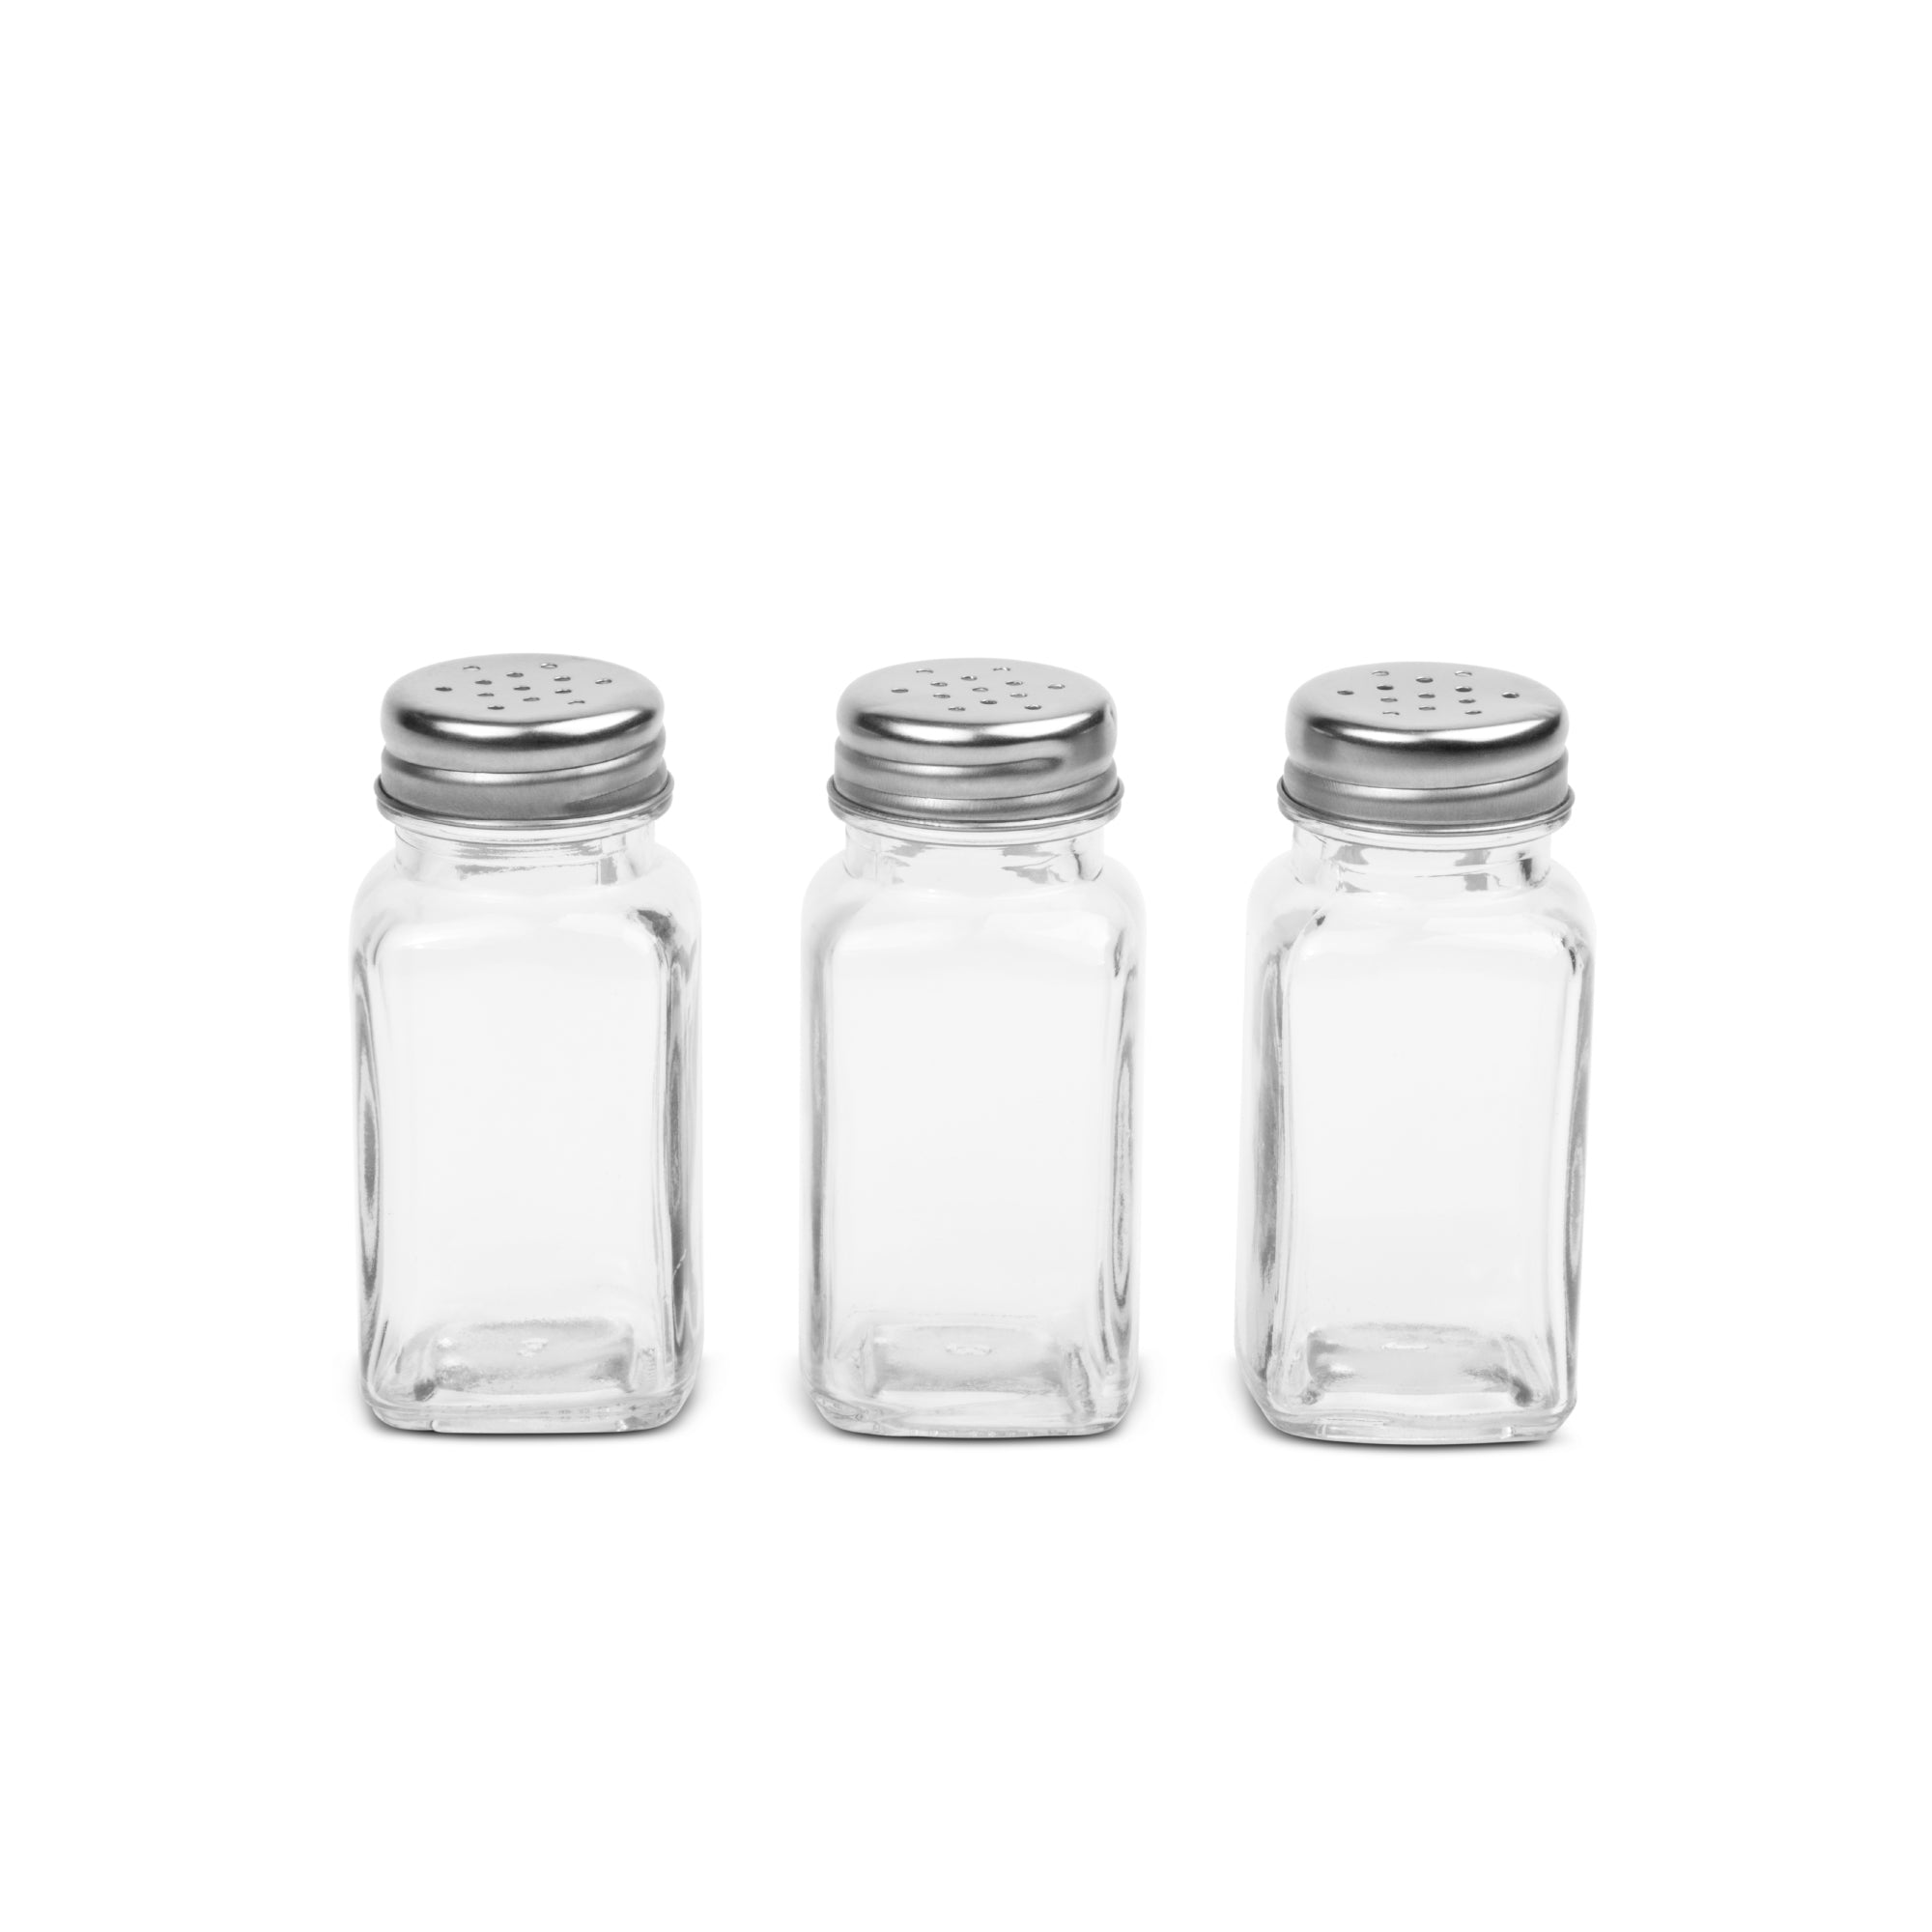 Powder Suger Shakers, Stainless Steel Powder Shaker, Endurance All Pur –  BABACLICK